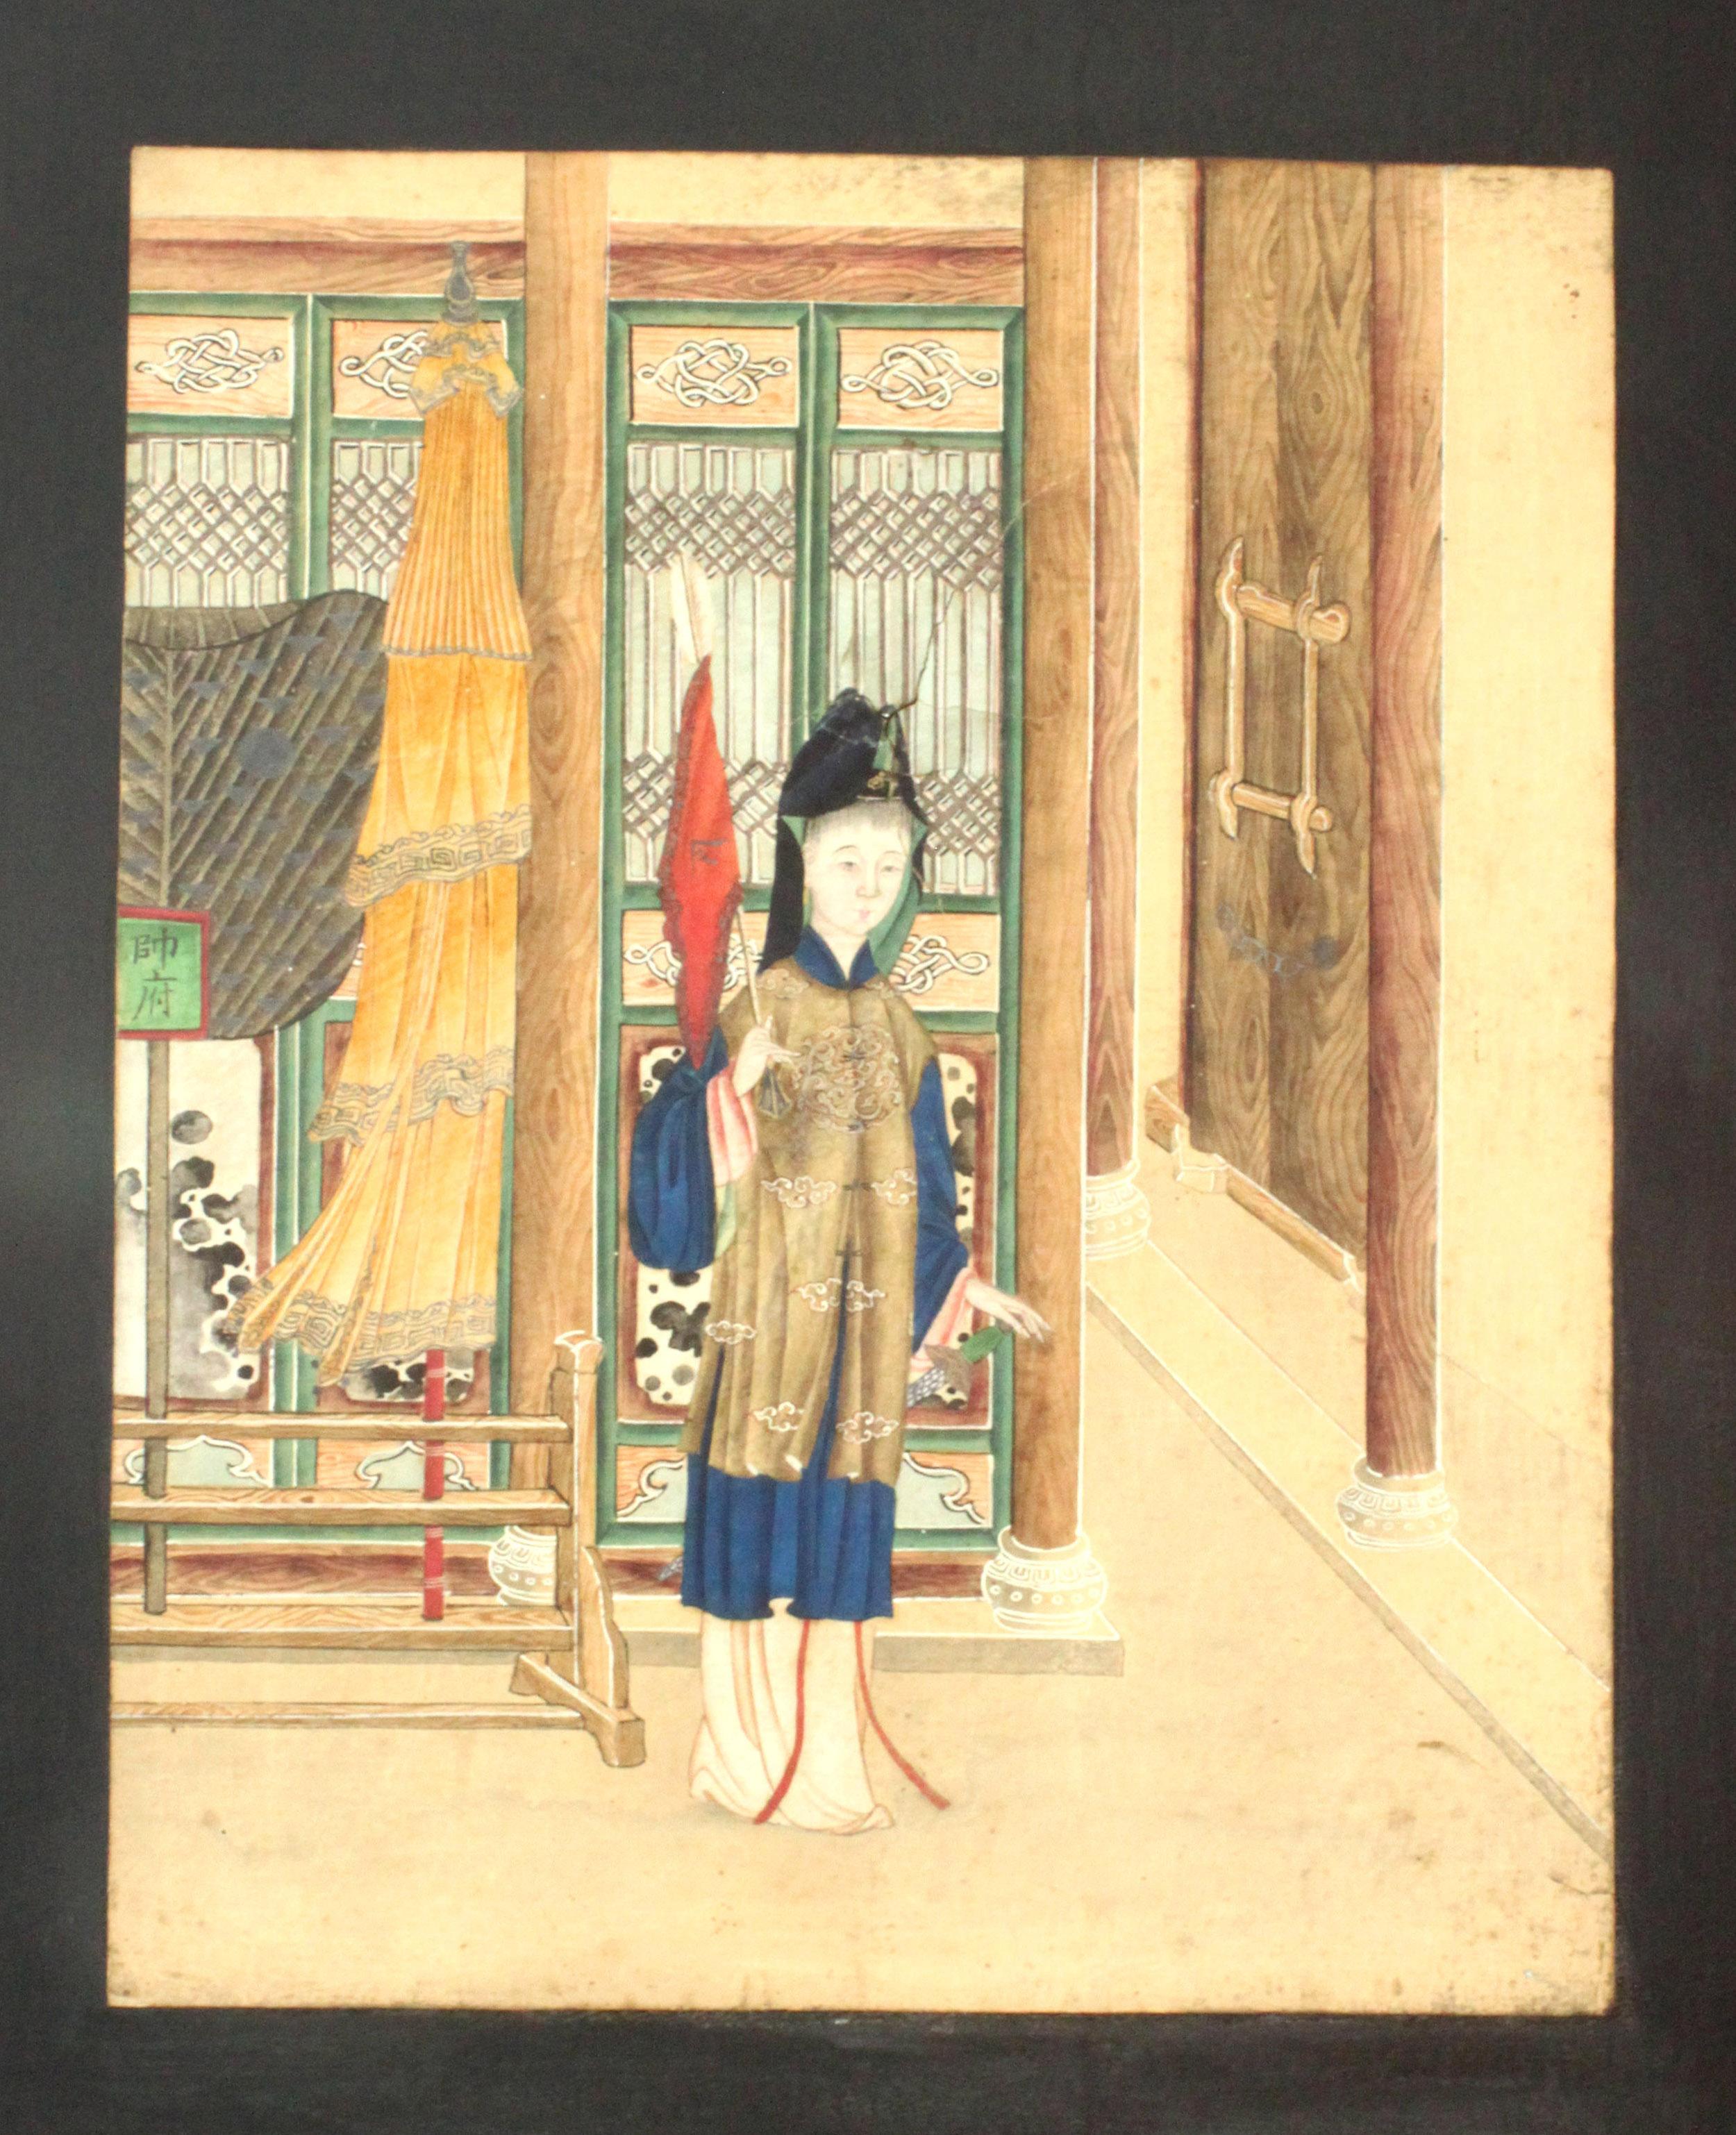 The watercolors, circa 1810
The screen later

A four-panel folding screen, each panel covered in vellum with three early nineteenth century Chinese watercolor panels mounted on black surrounds with pale green narrow borders.
The group of 12